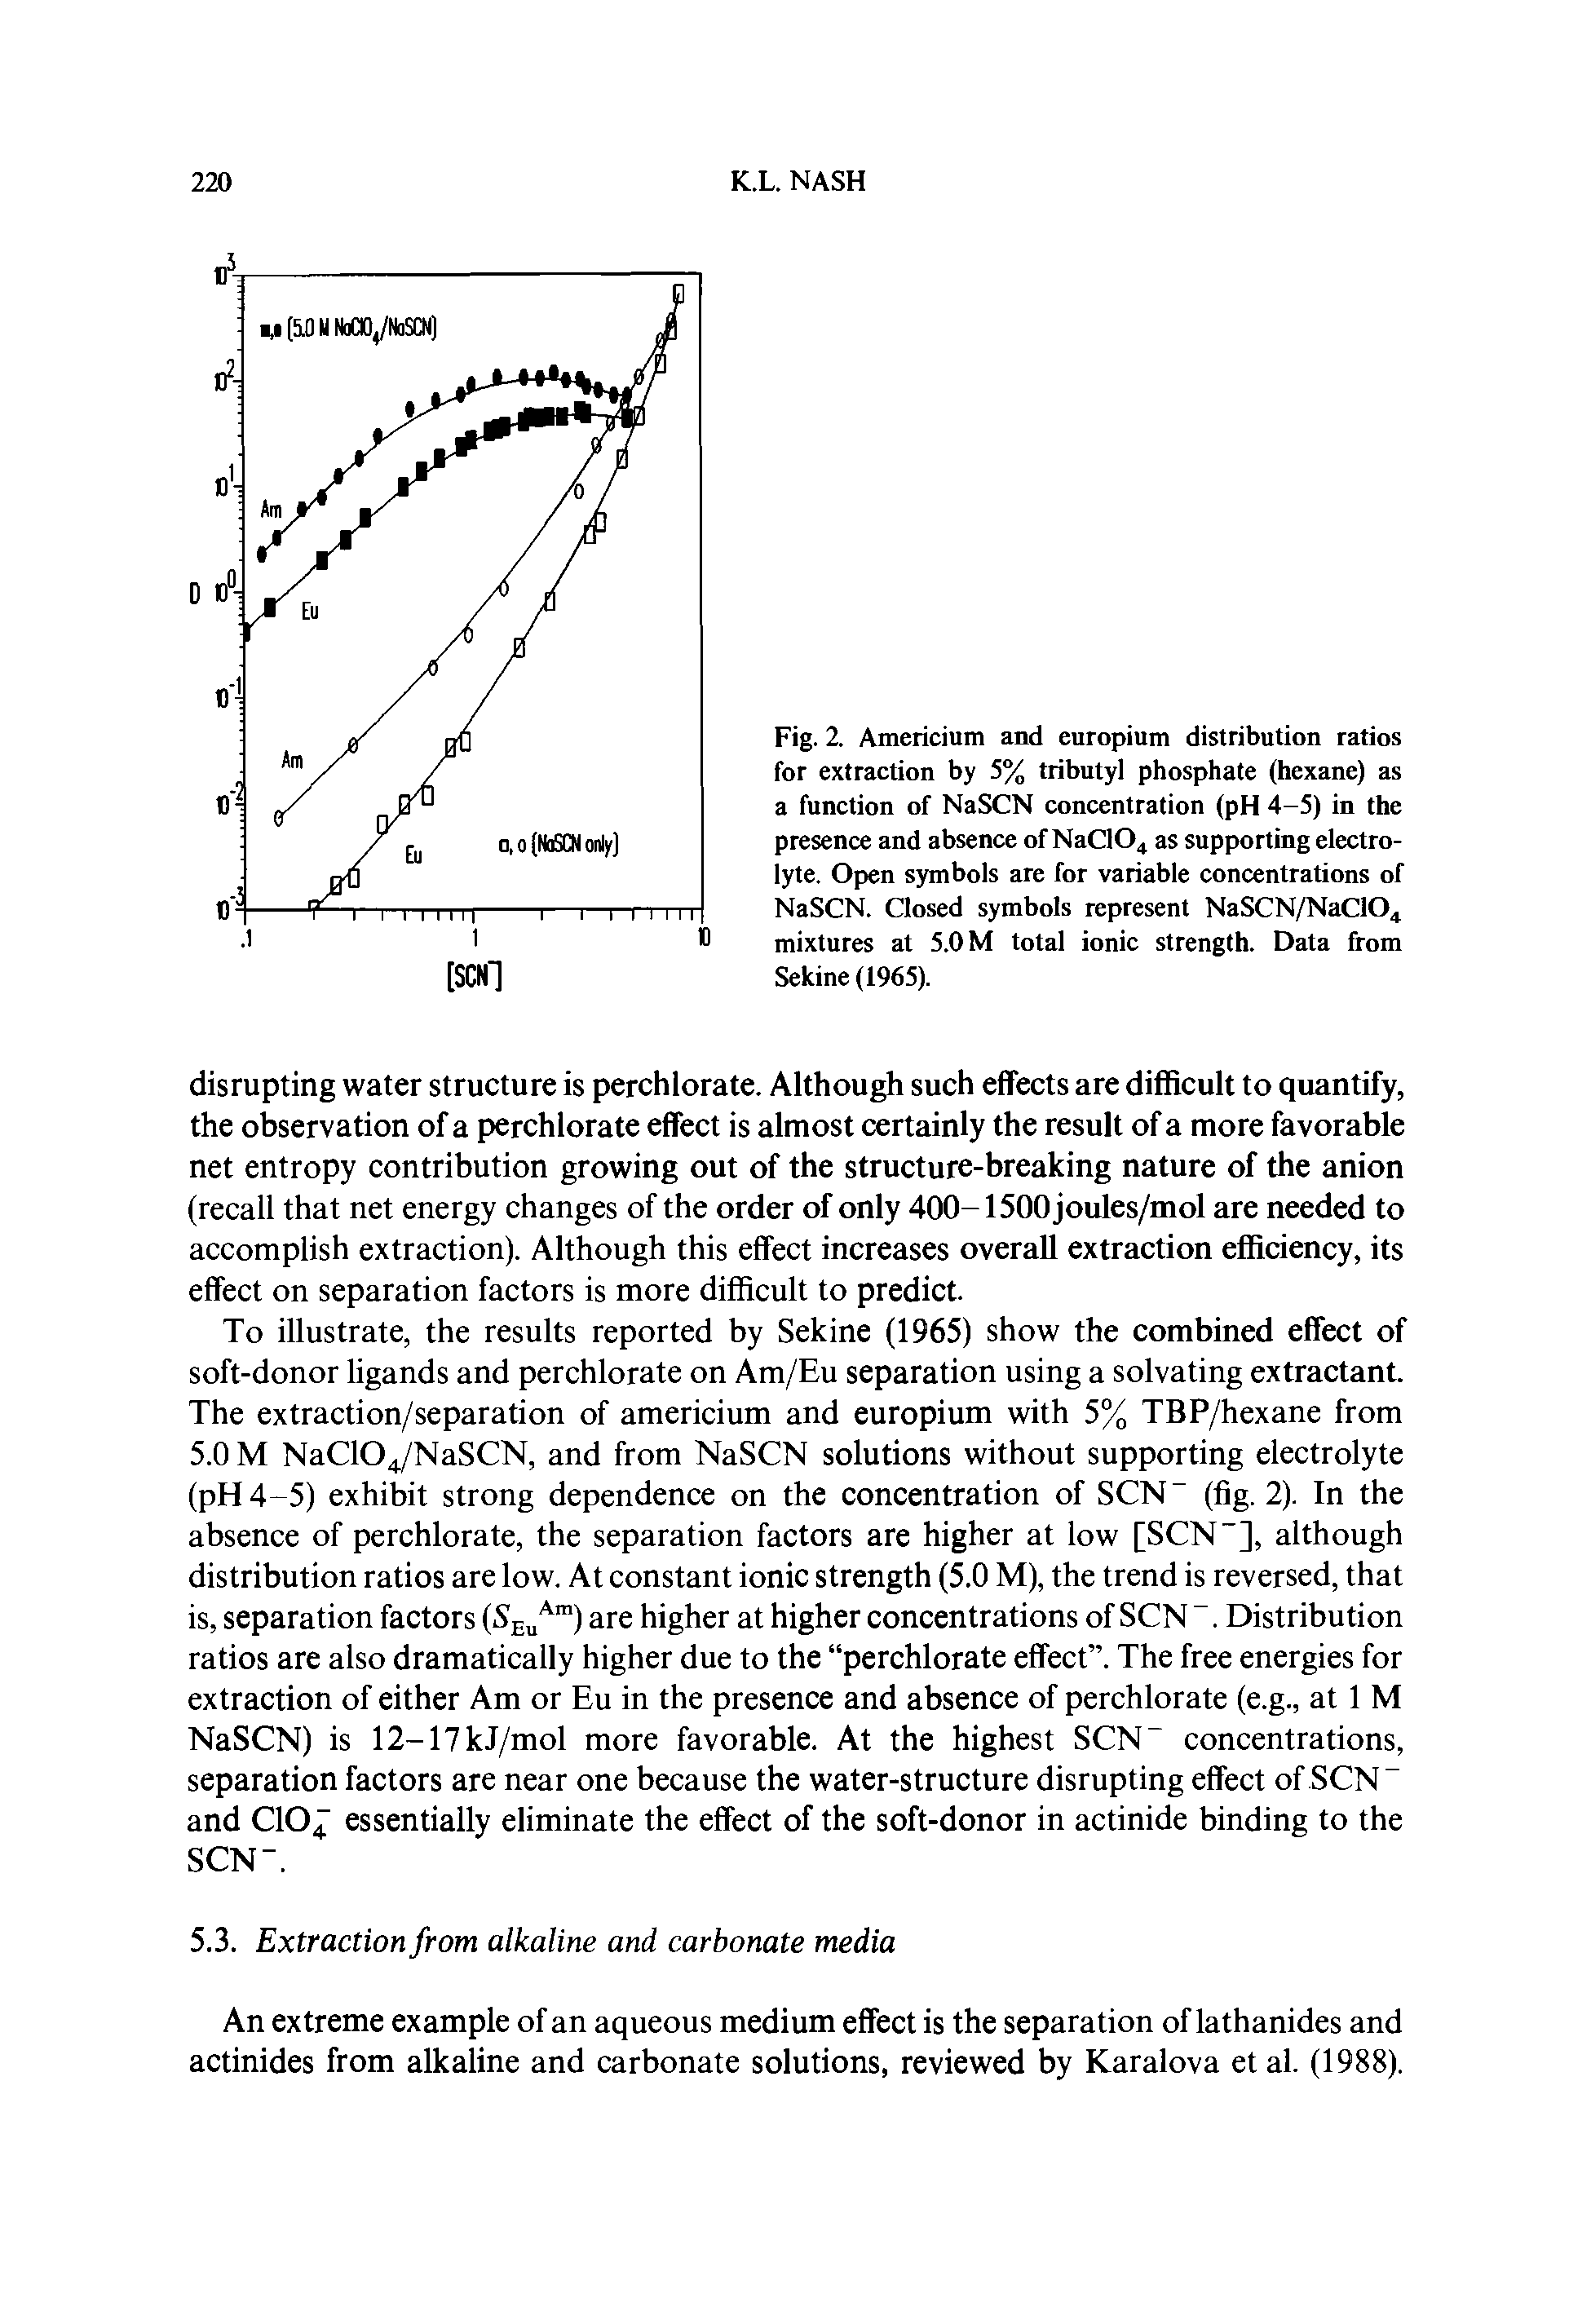 Fig. Z Americium and europium distriburion ratios for extraction by 5% tributyl phosphate (hexane) as a function of NaSCN concentration (pH 4-5) in the presence and absence of Naa04 as supporting electrolyte. Open symbols are for variable concentrations of NaSCN. Closed symbols represent NaSCN/NaC104 mixtures at 5.0 M total ionic strength. Data from Sekine(1965).